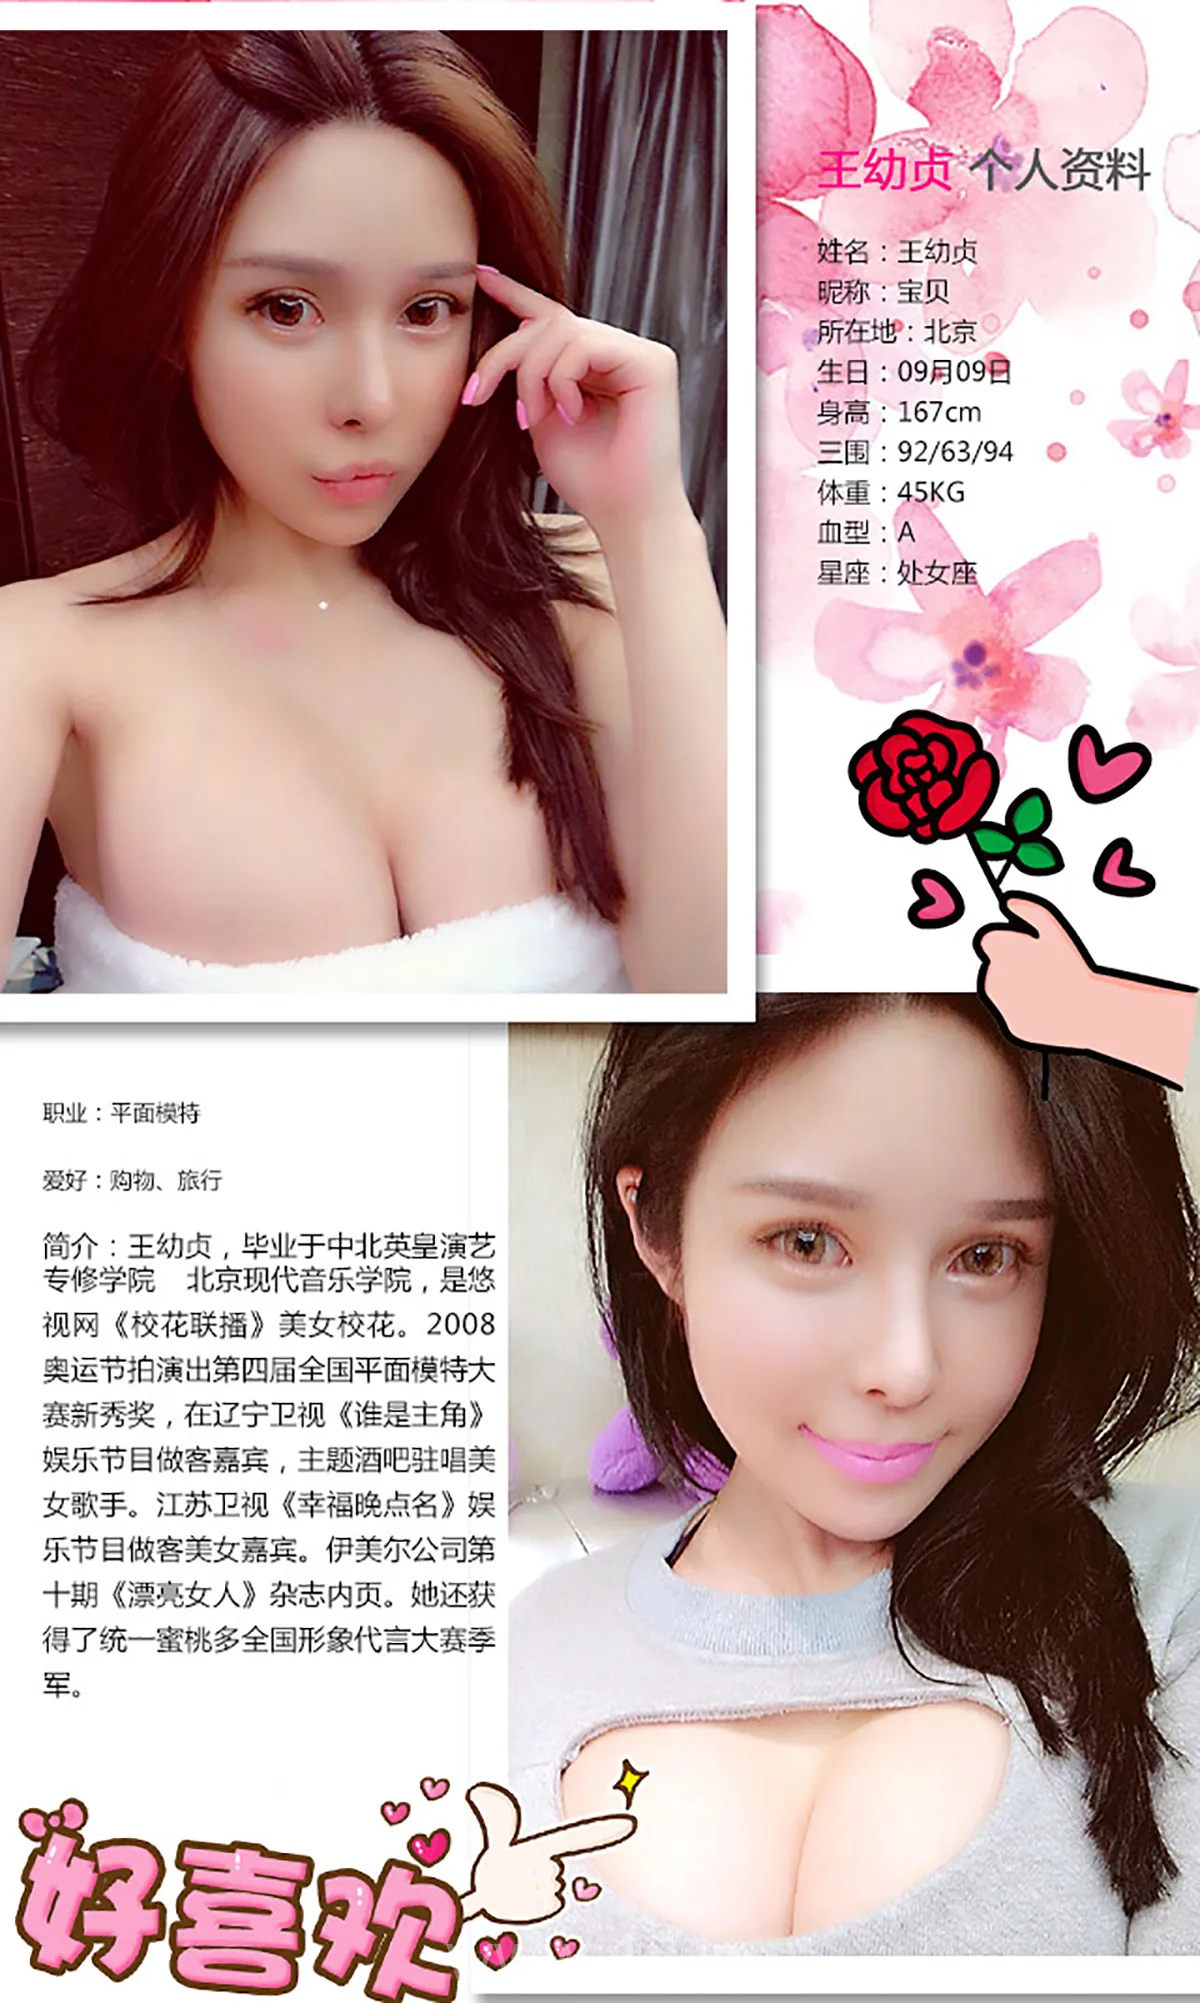 UGIRLS NO.226 Nice-looking & Adorable Chinese Chick 王幼贞